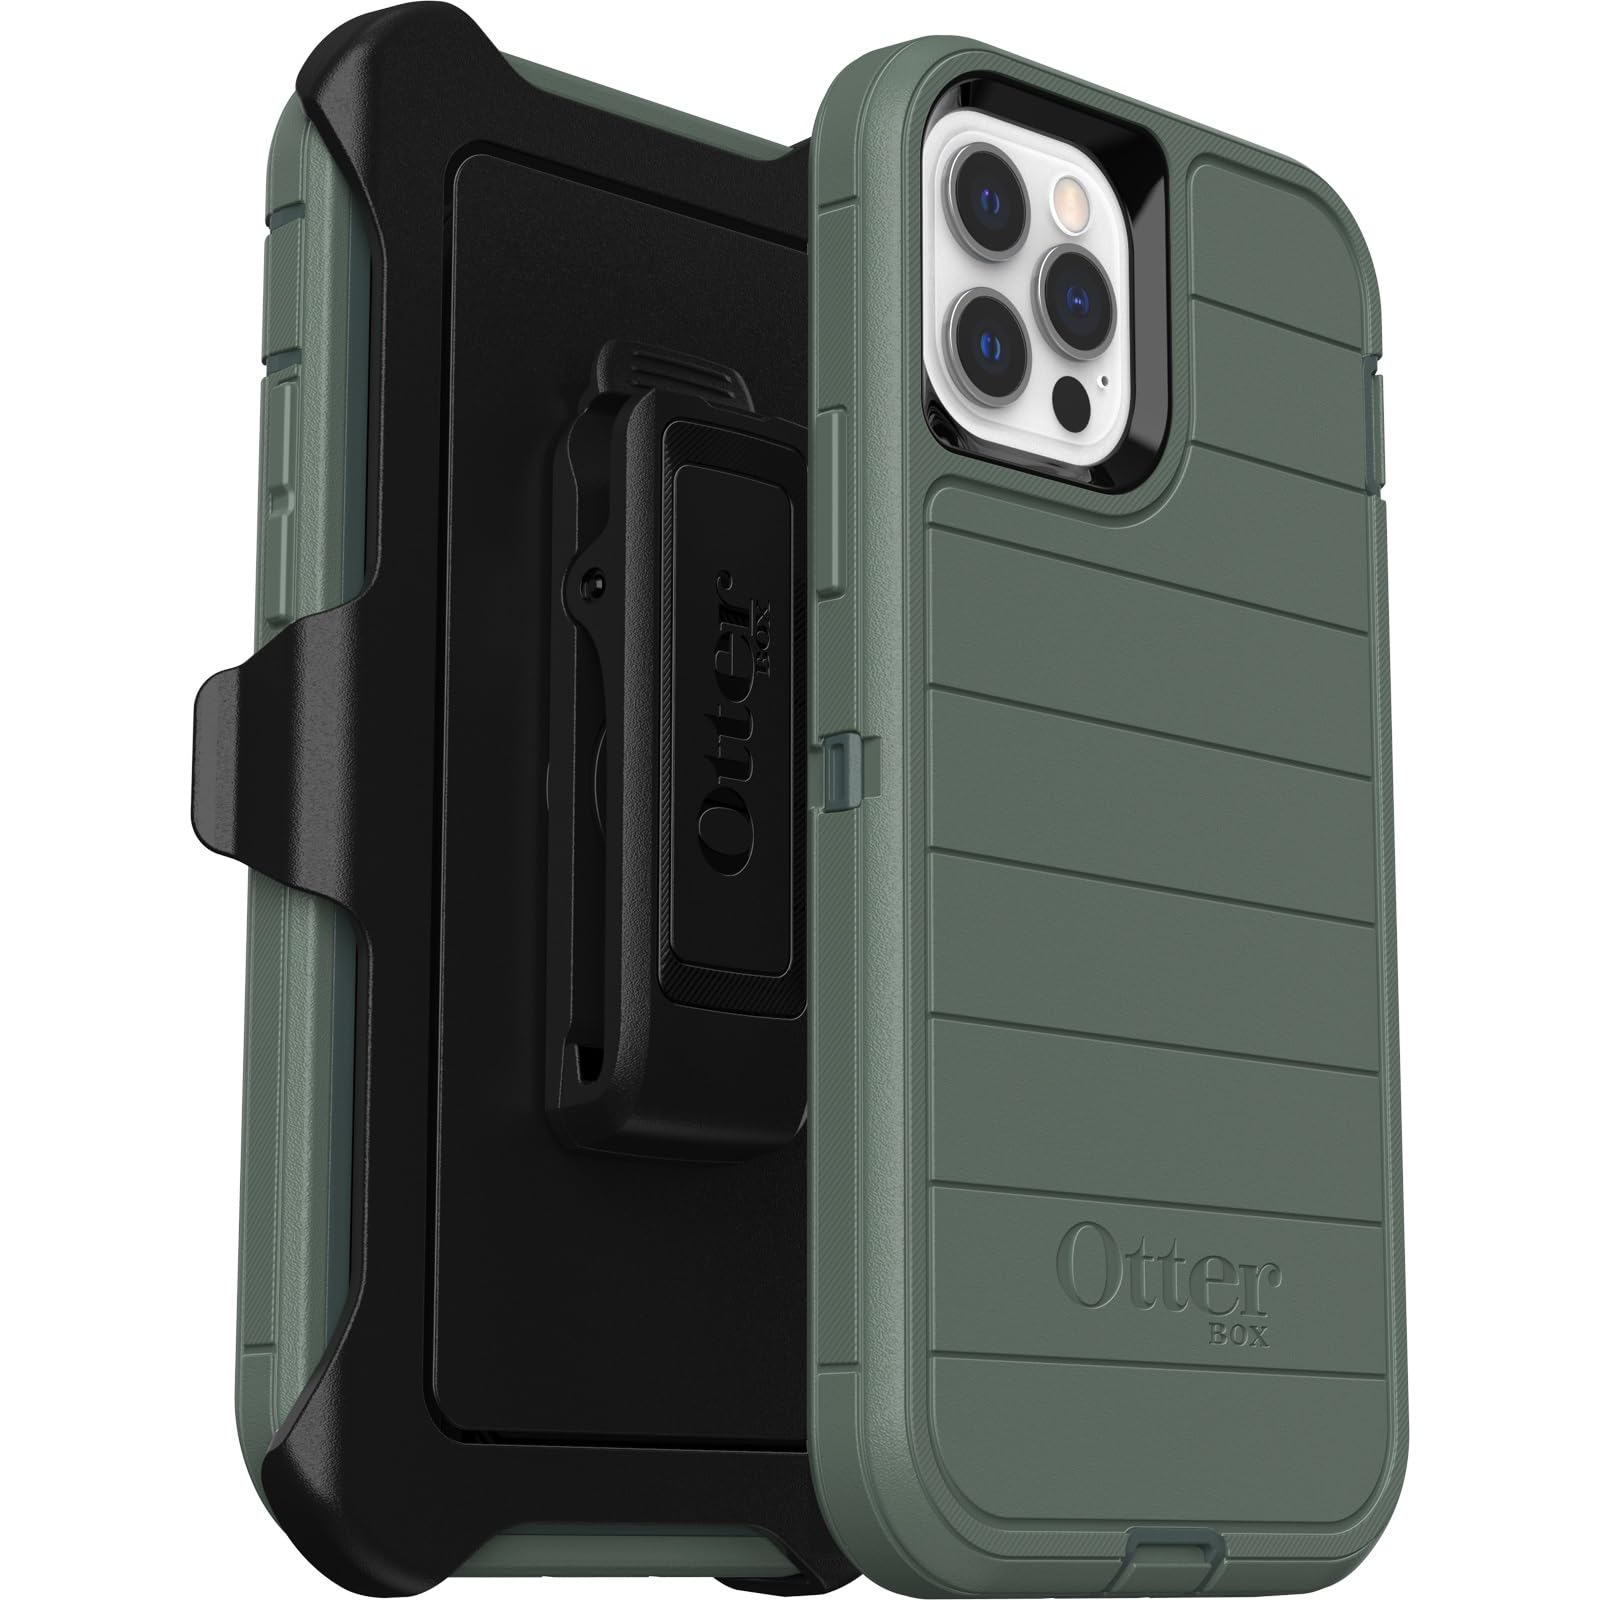 OtterBox Defender Series Case for iPhone 12 & iPhone 12 Pro (Only) - Holster Clip Included - Microbial Defense Protection - Non-Retail Packaging - Forest Ranger (Green)